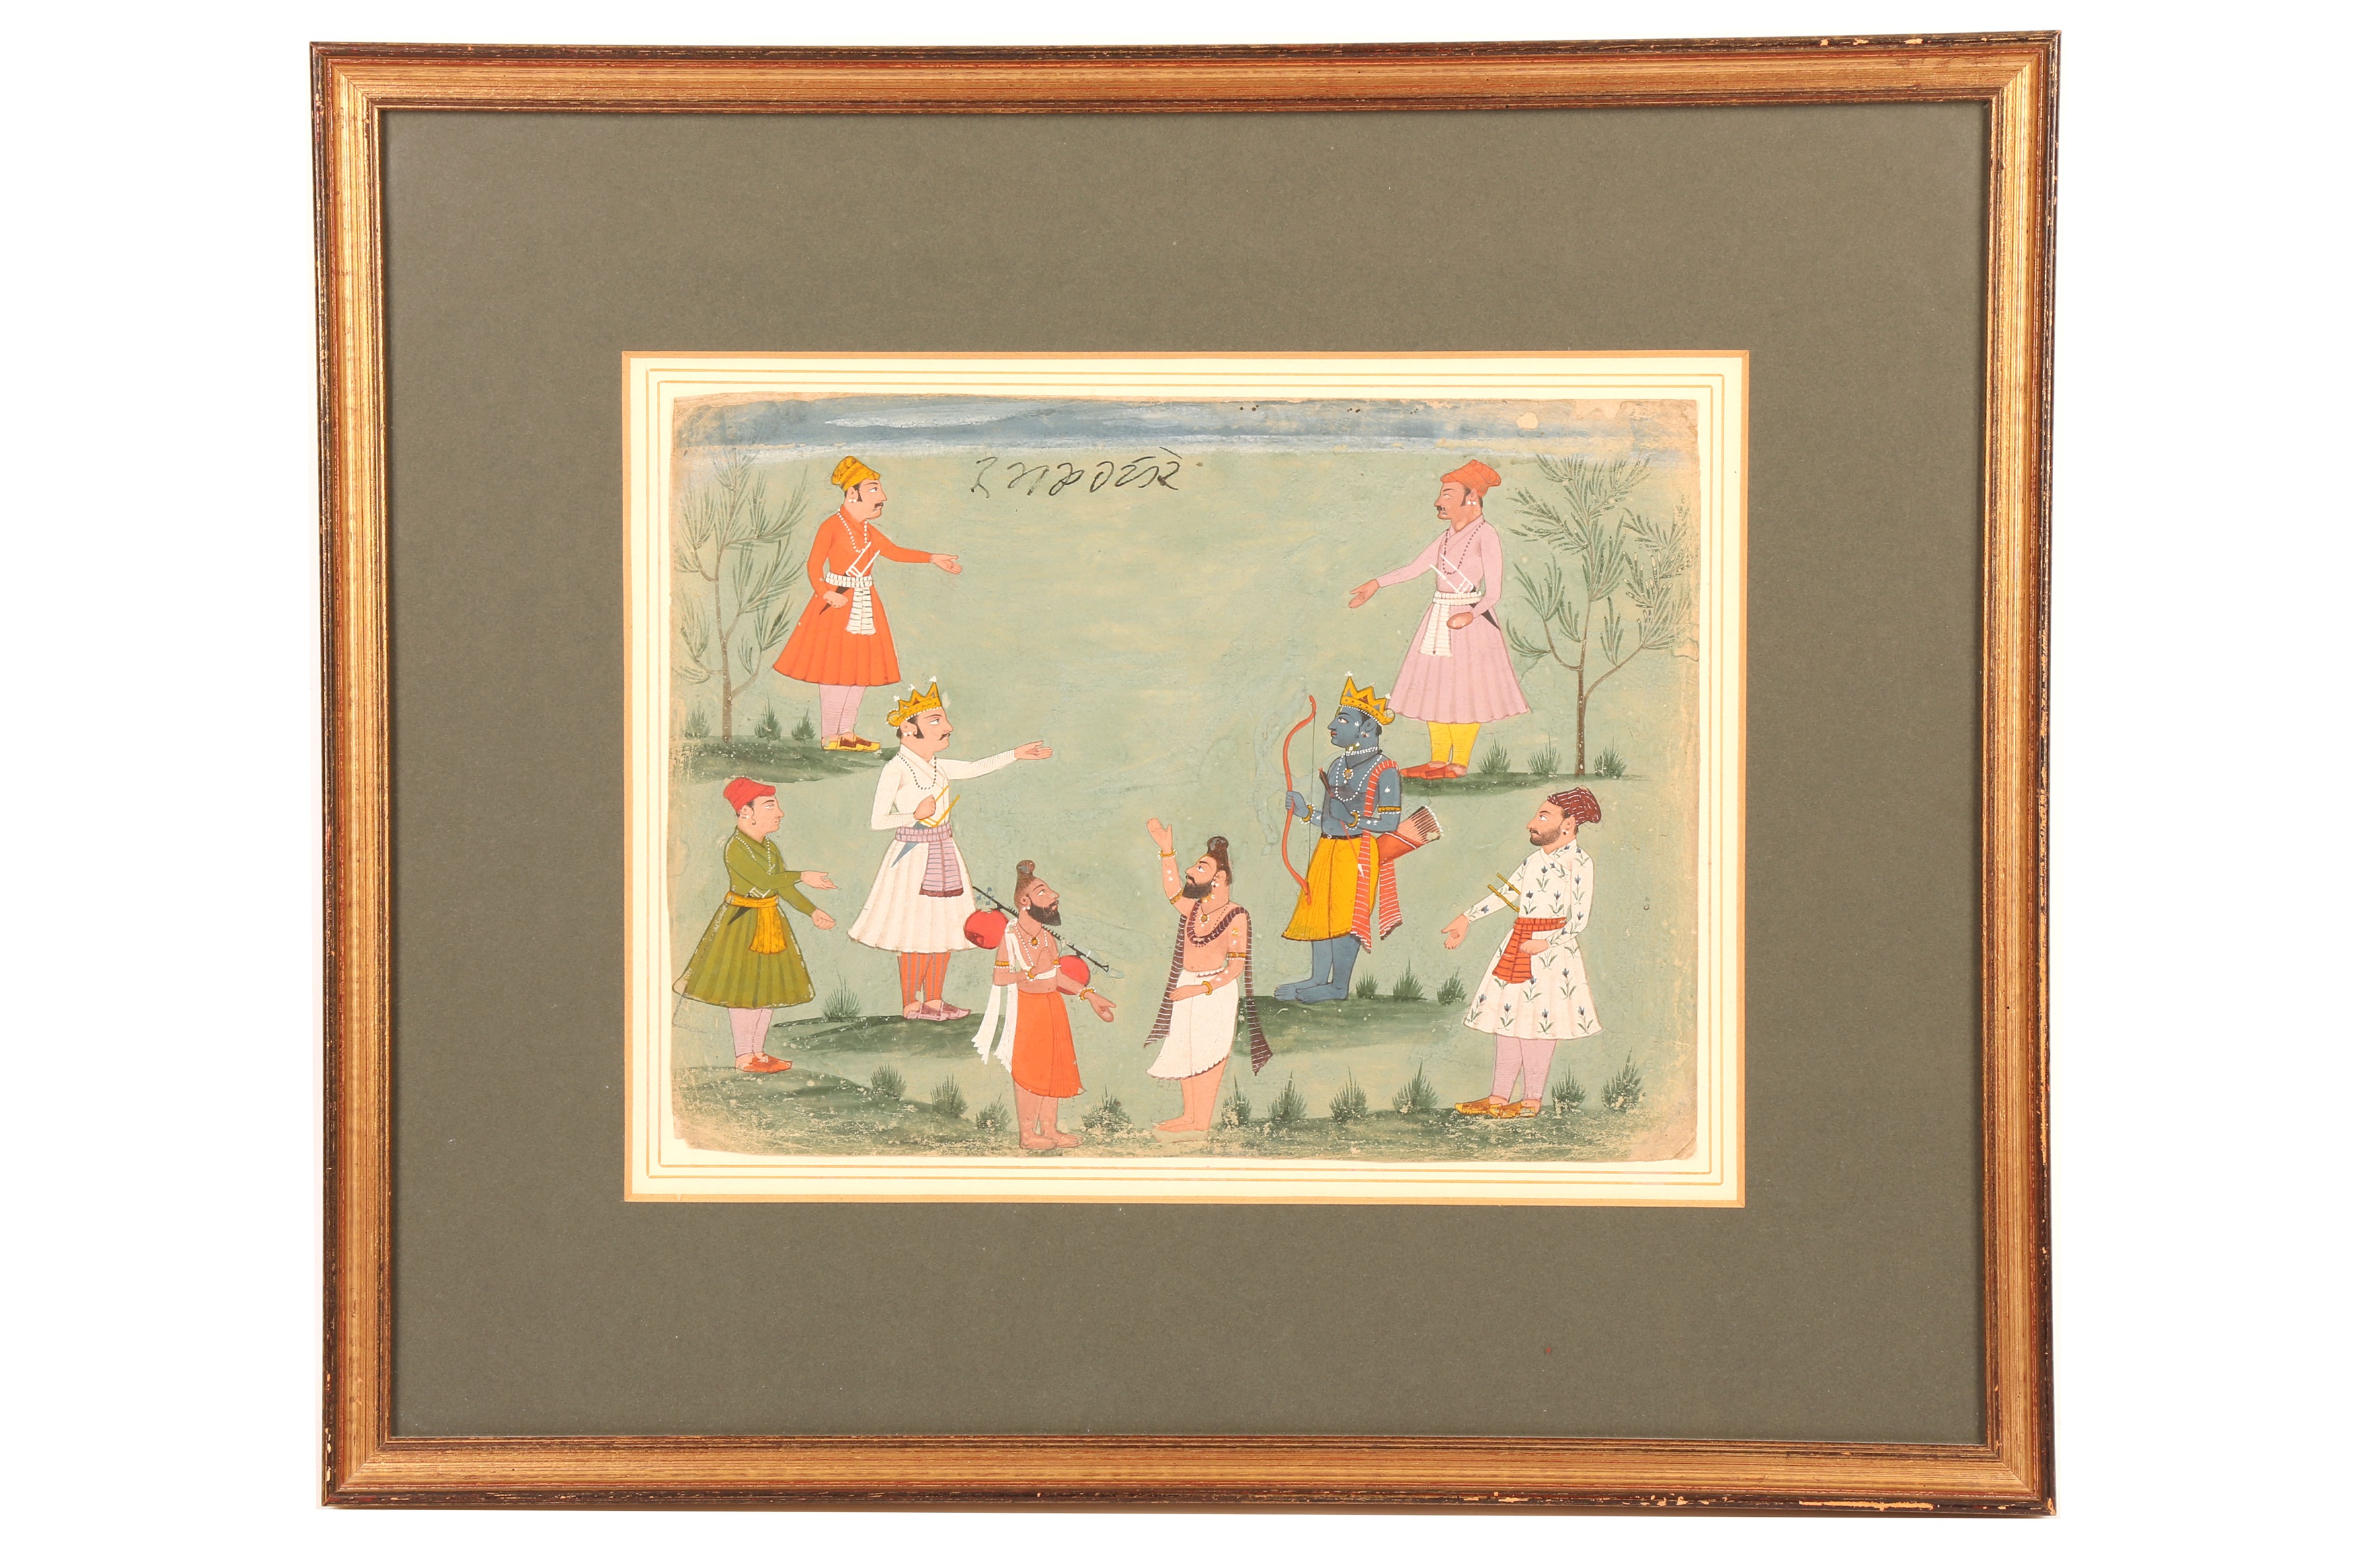 AN ILLUSTRATION FROM A RAMAYANA SERIES: RAMA AND BHARATA MEETING IN THE FOREST - Image 2 of 4